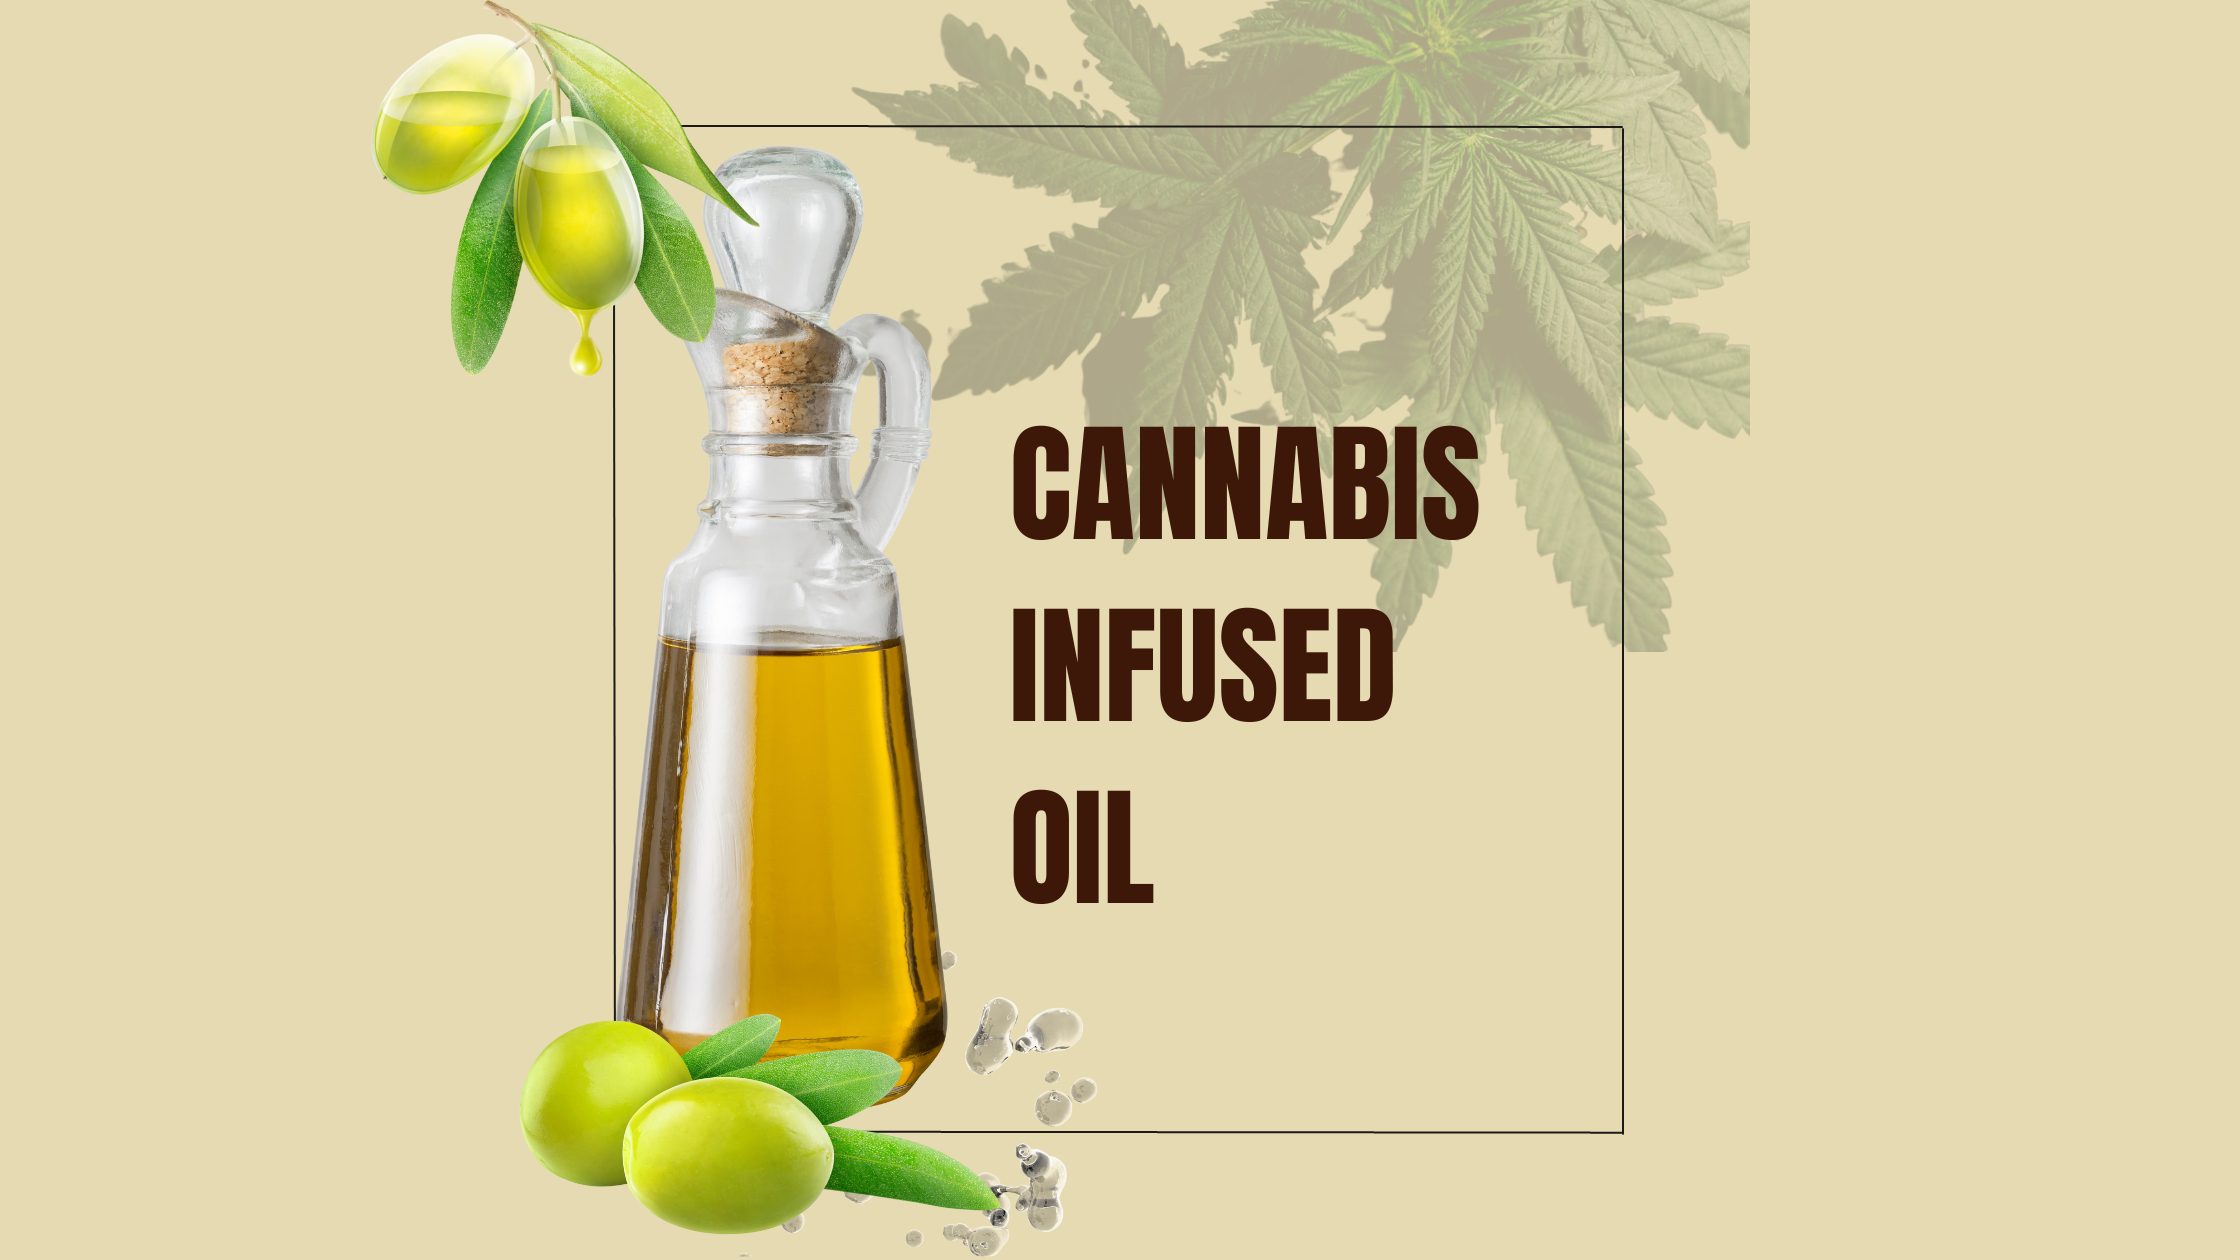 Cannabis Infused oil (2240 × 1260 px)